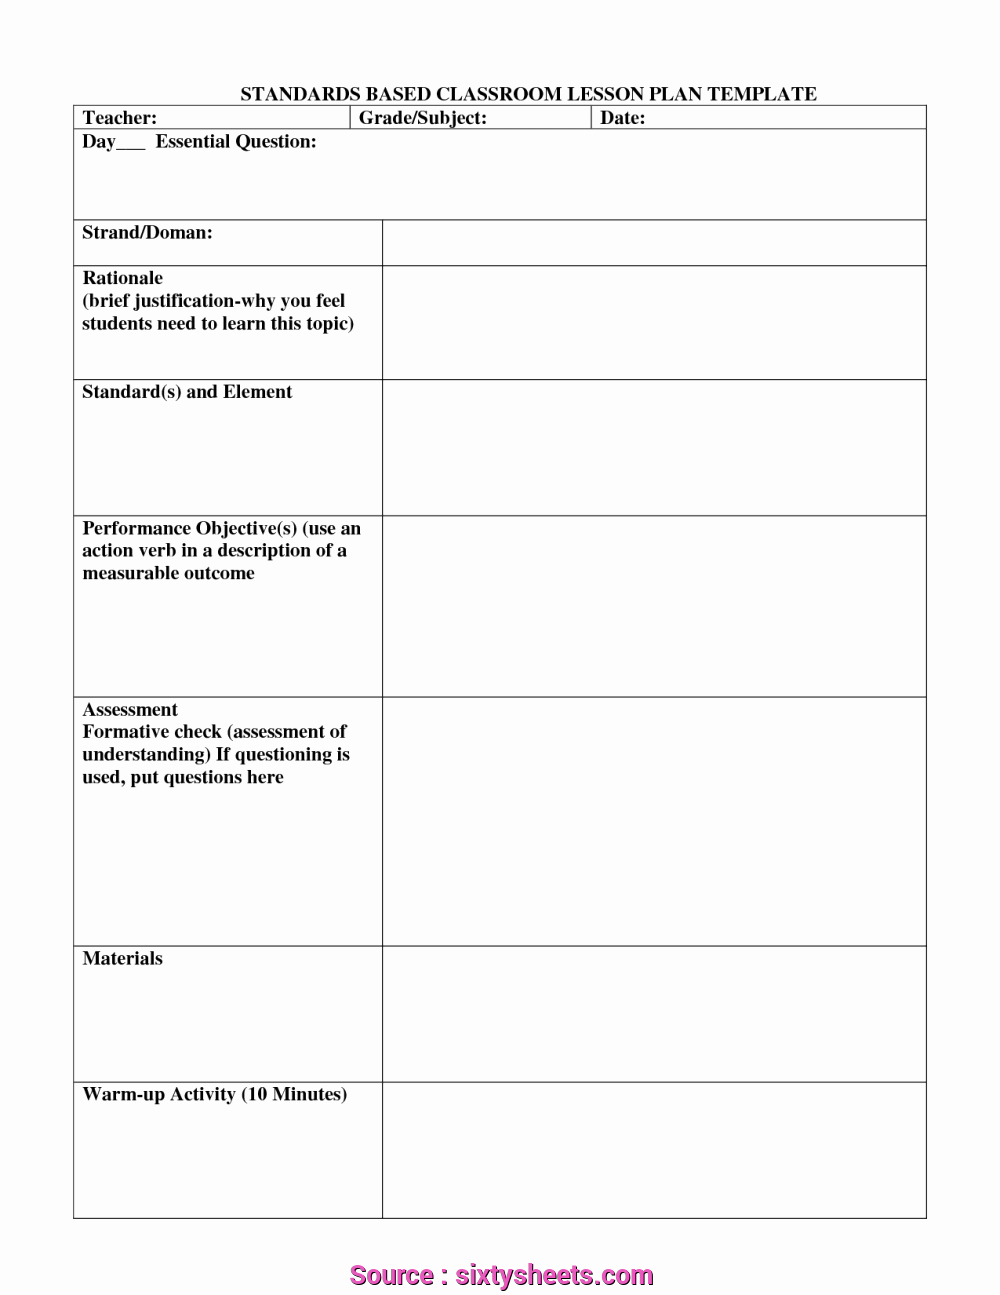 Standard Based Lesson Plan Template Beautiful 4 Fantastic Printable Lesson Plan Template with Standards Ehlschlaeger